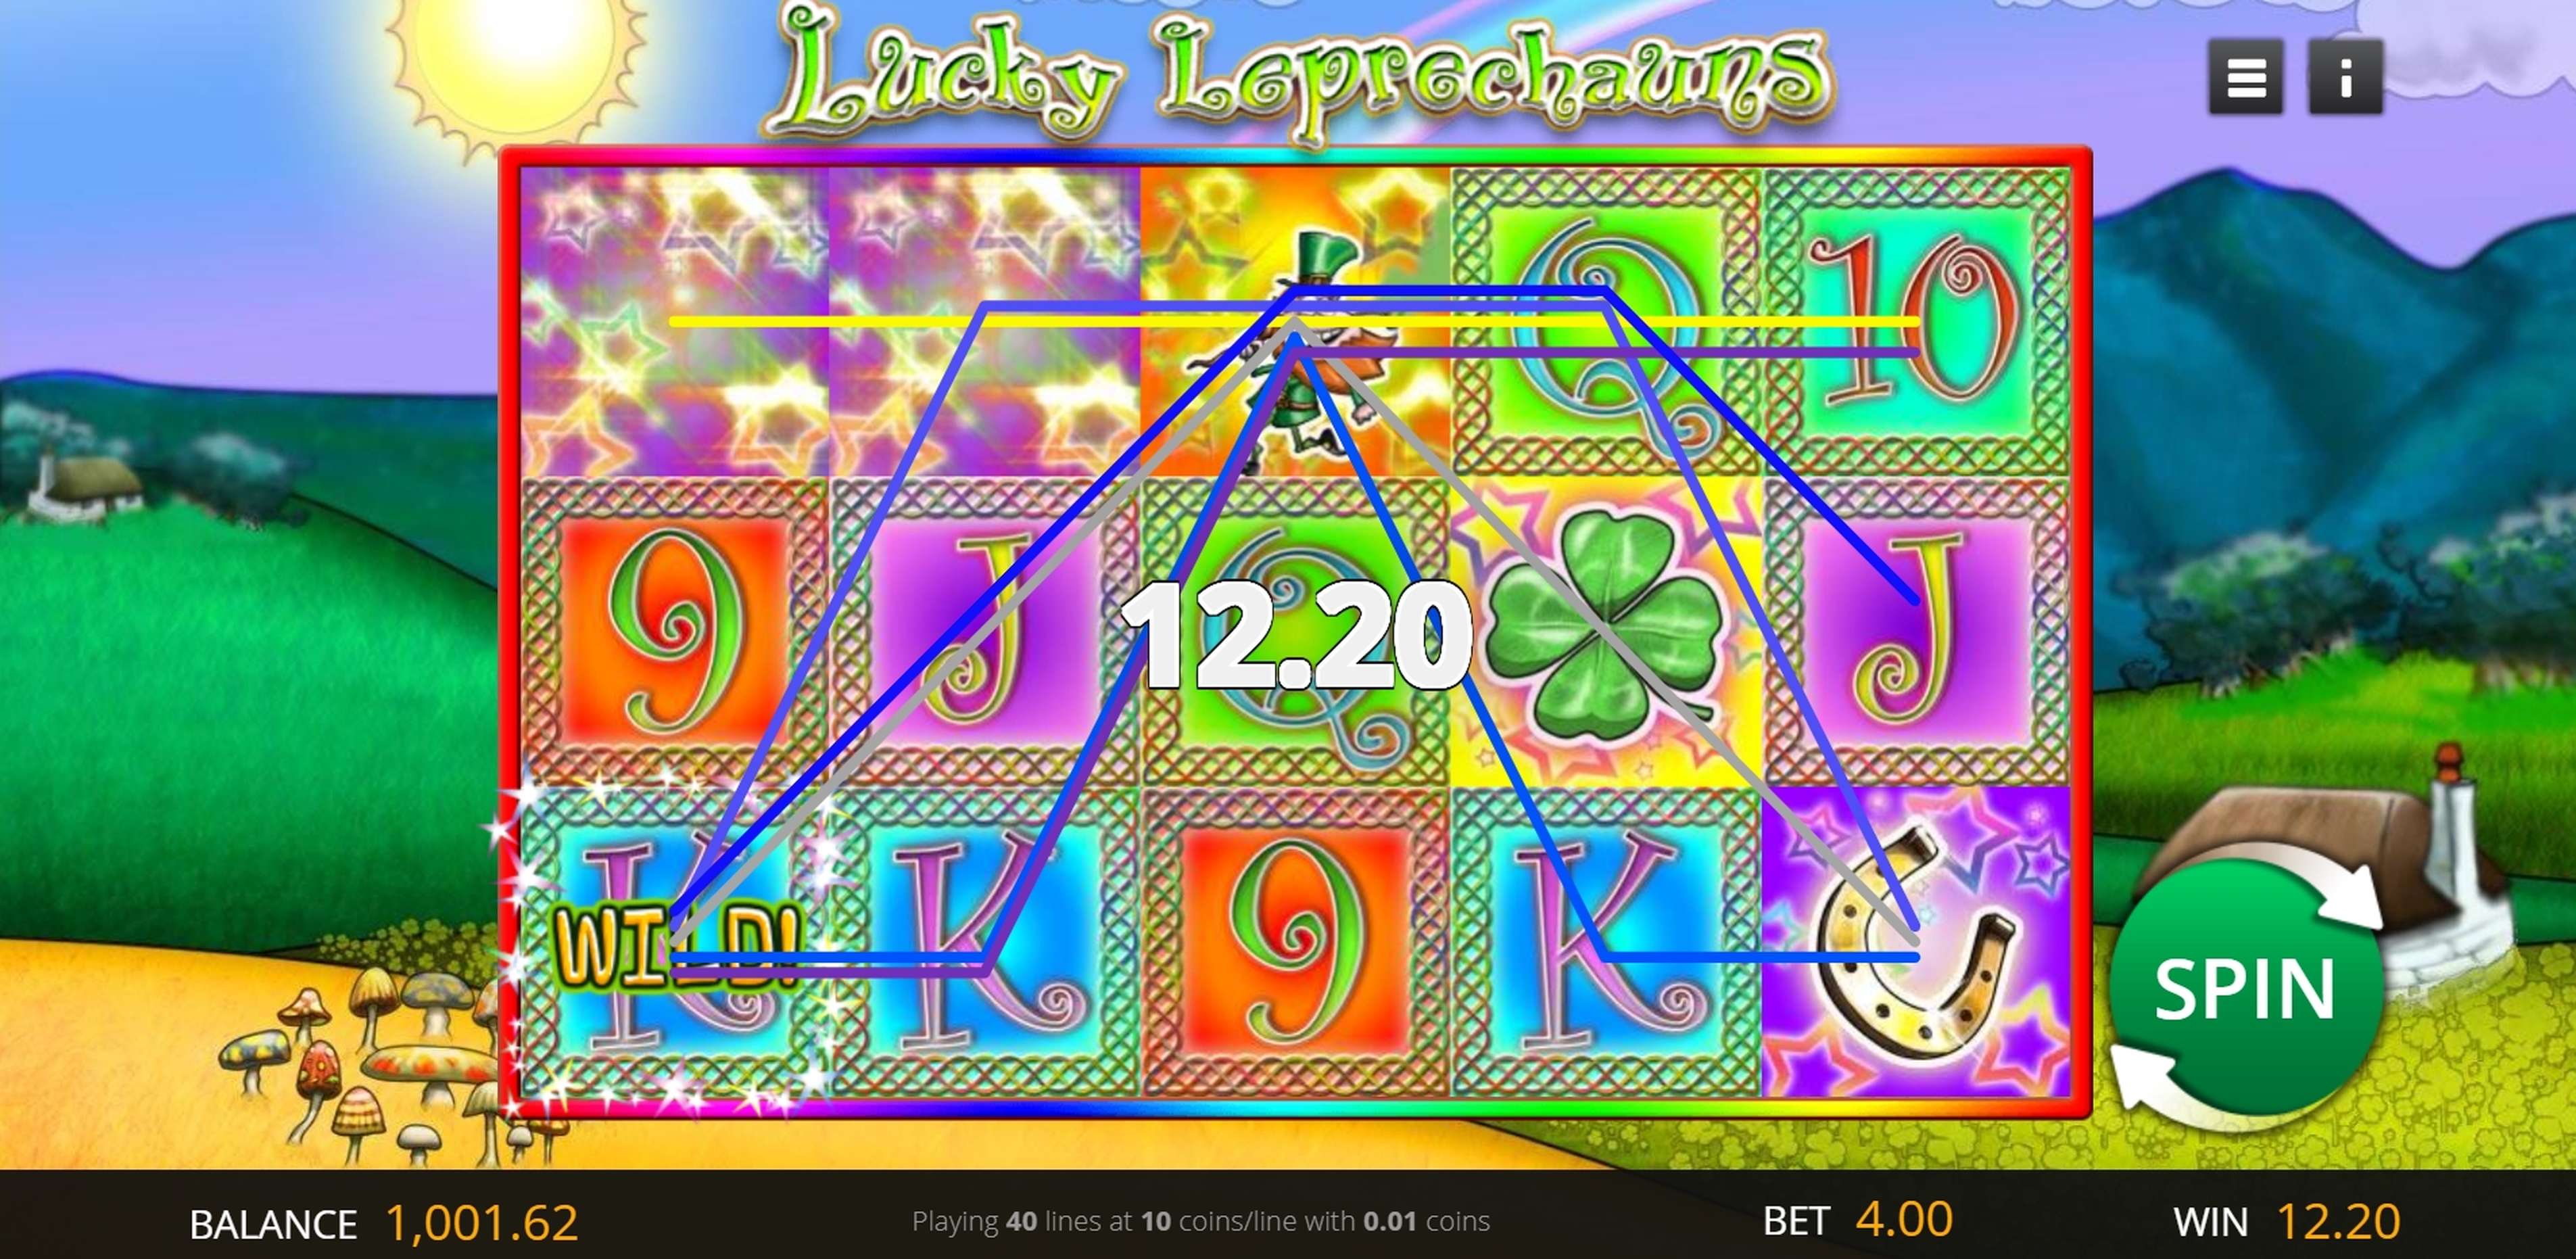 Win Money in Lucky Leprechauns Free Slot Game by Genii